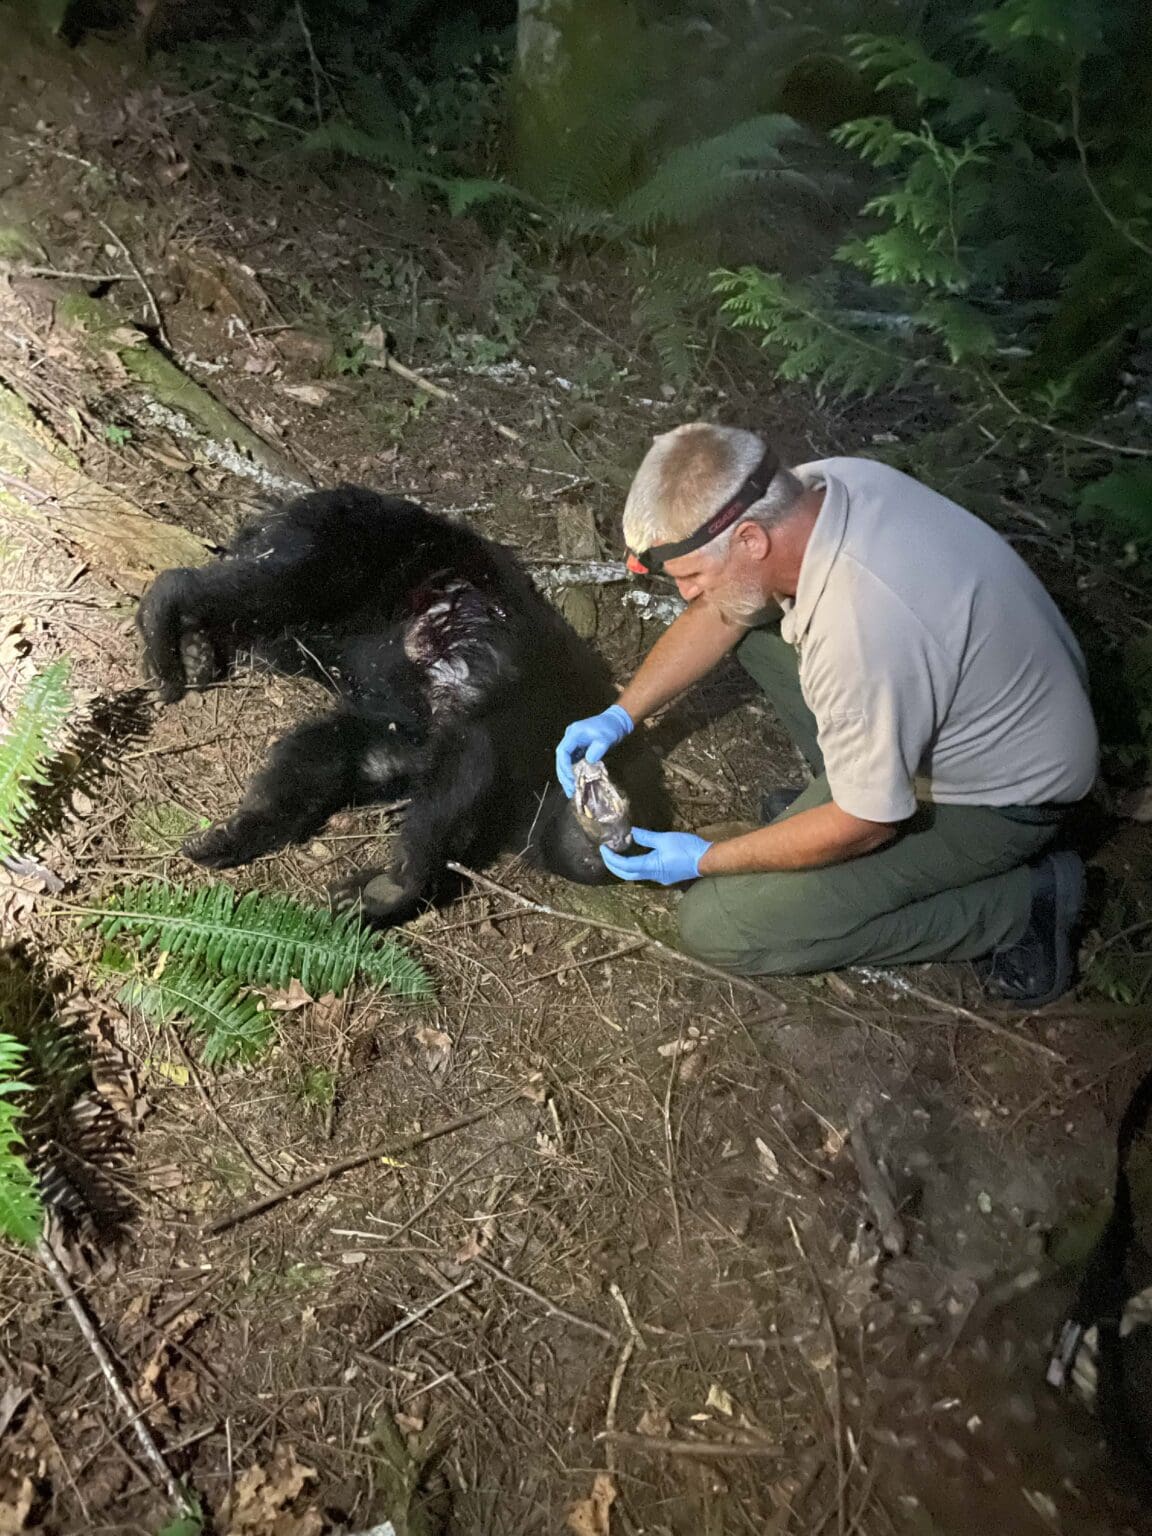 Enforcement officers from the Washington Department of Fish and Wildlife hunted and fatally shot a female black bear in the Y Road Trail area on Aug. 3